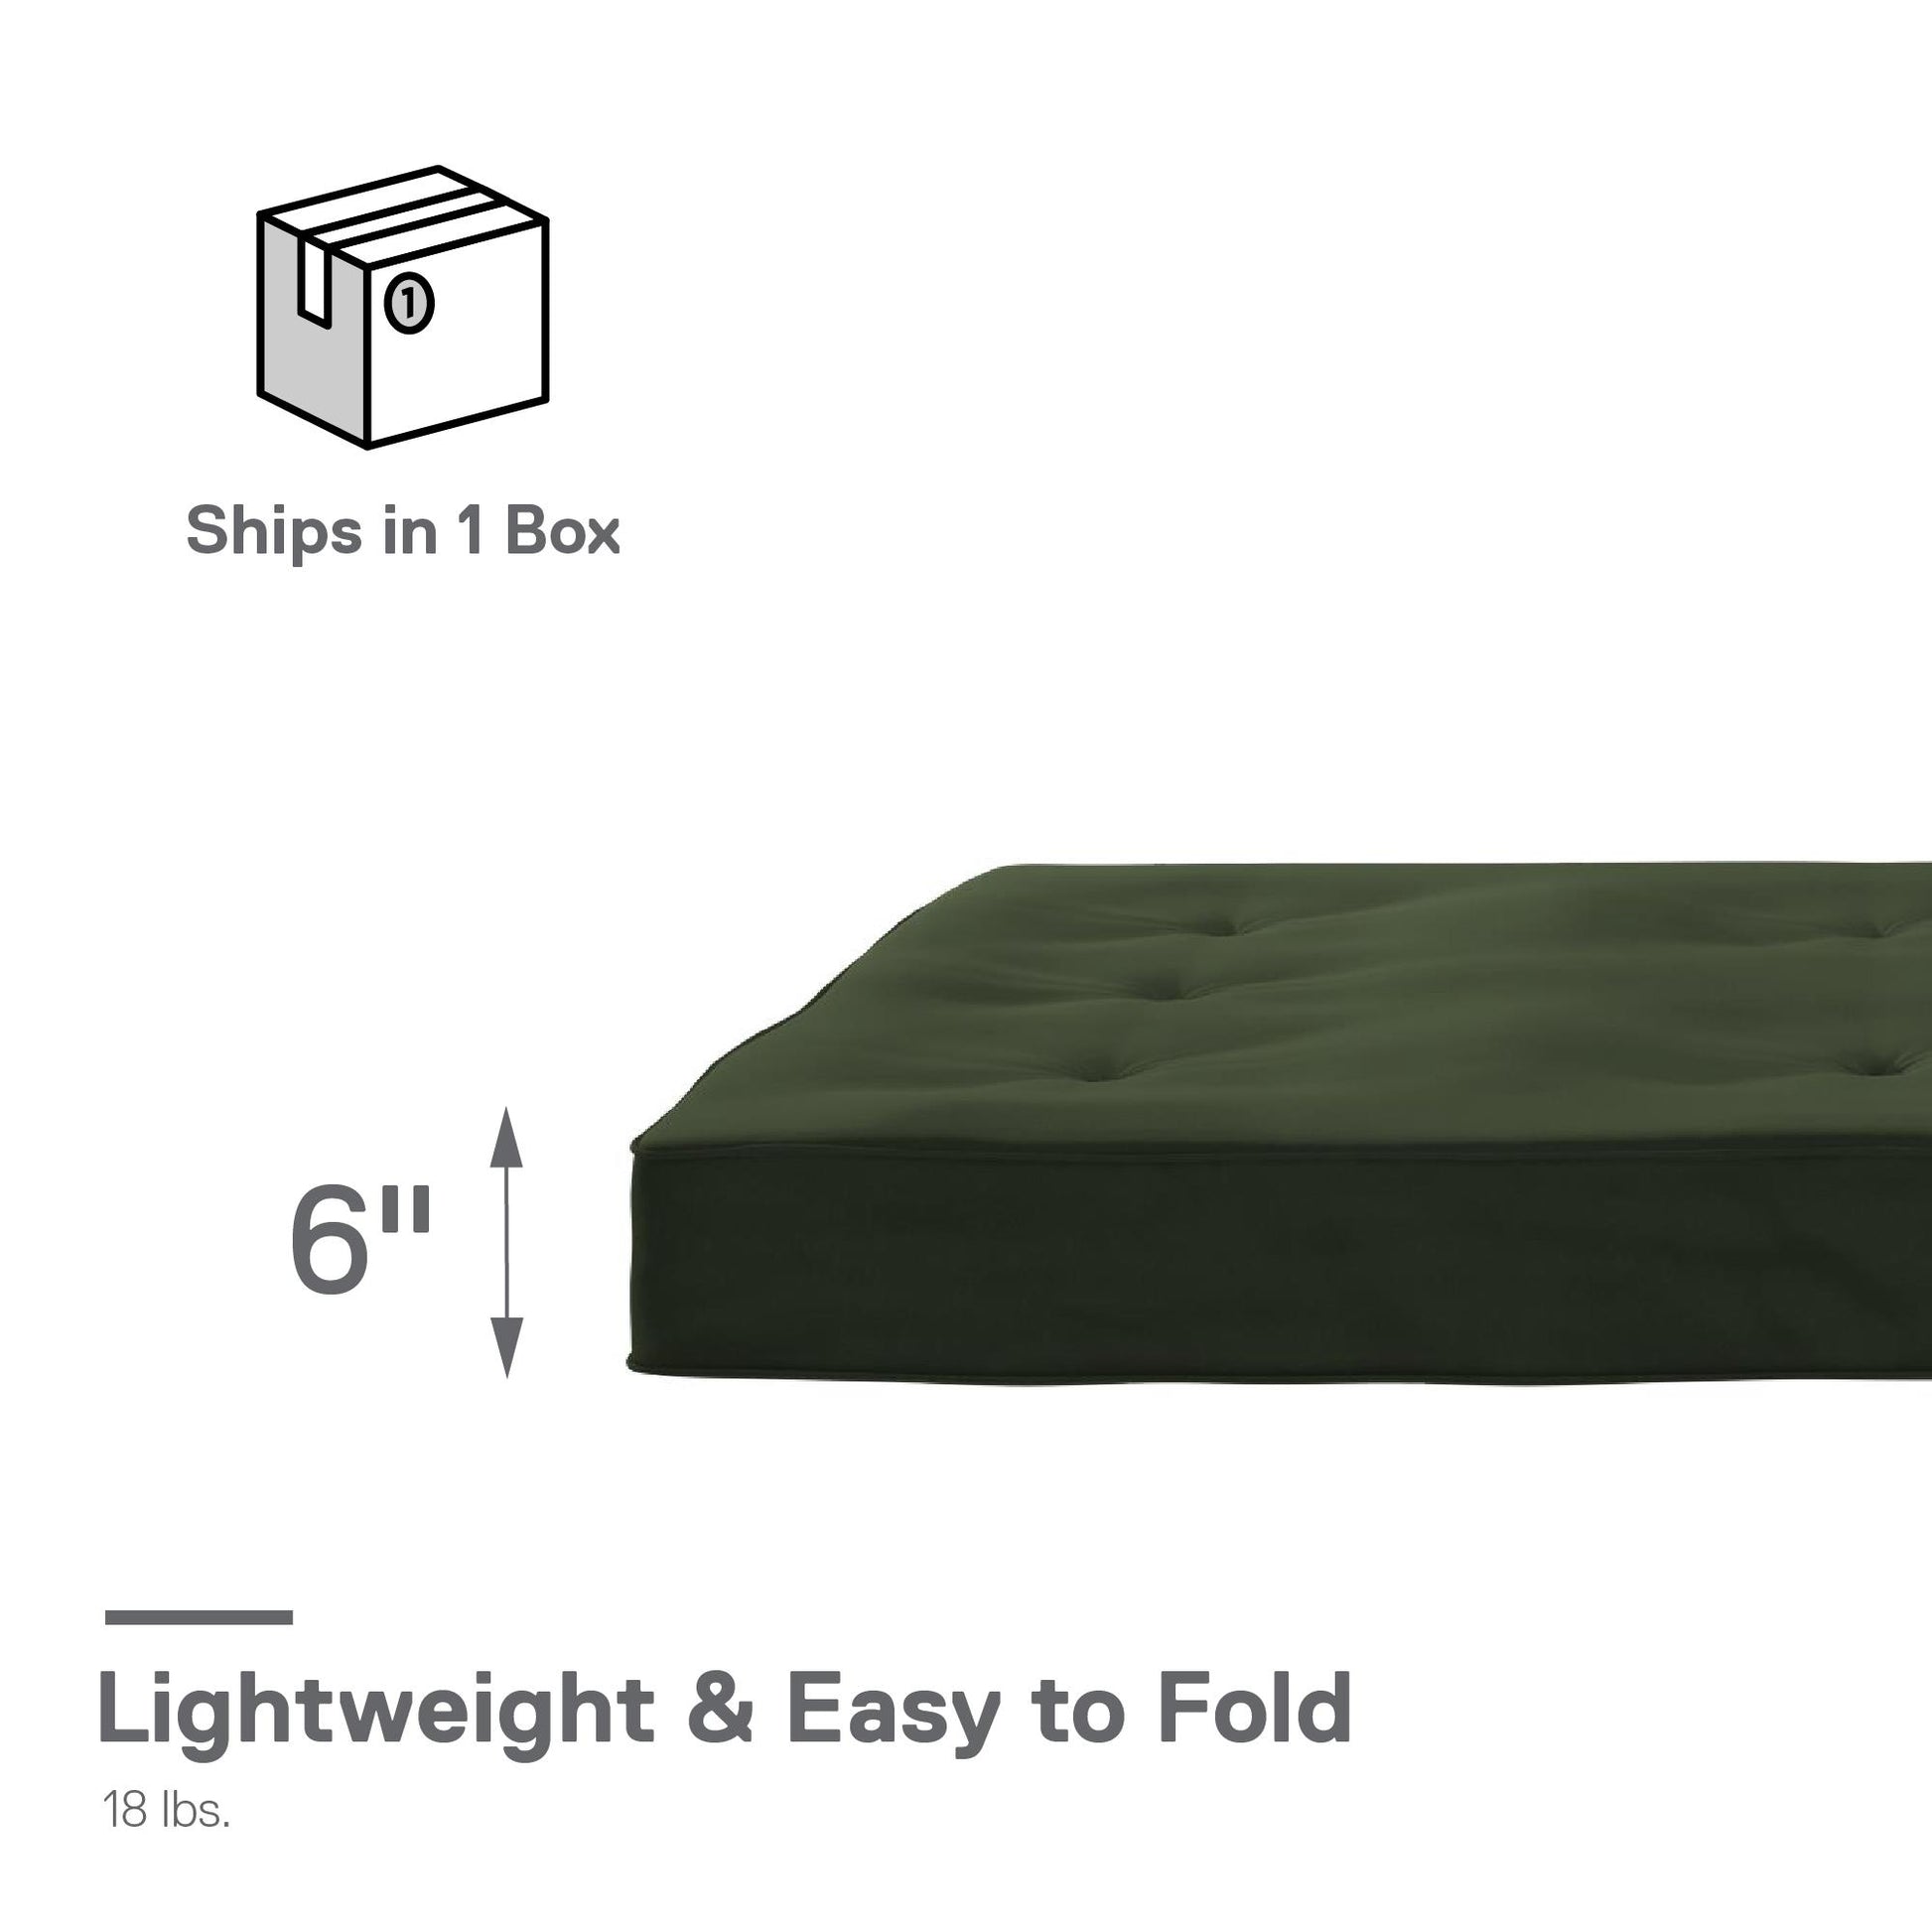 Carson 6 Inch Thermobonded High Density Polyester Fill Futon Mattress - Green - Full